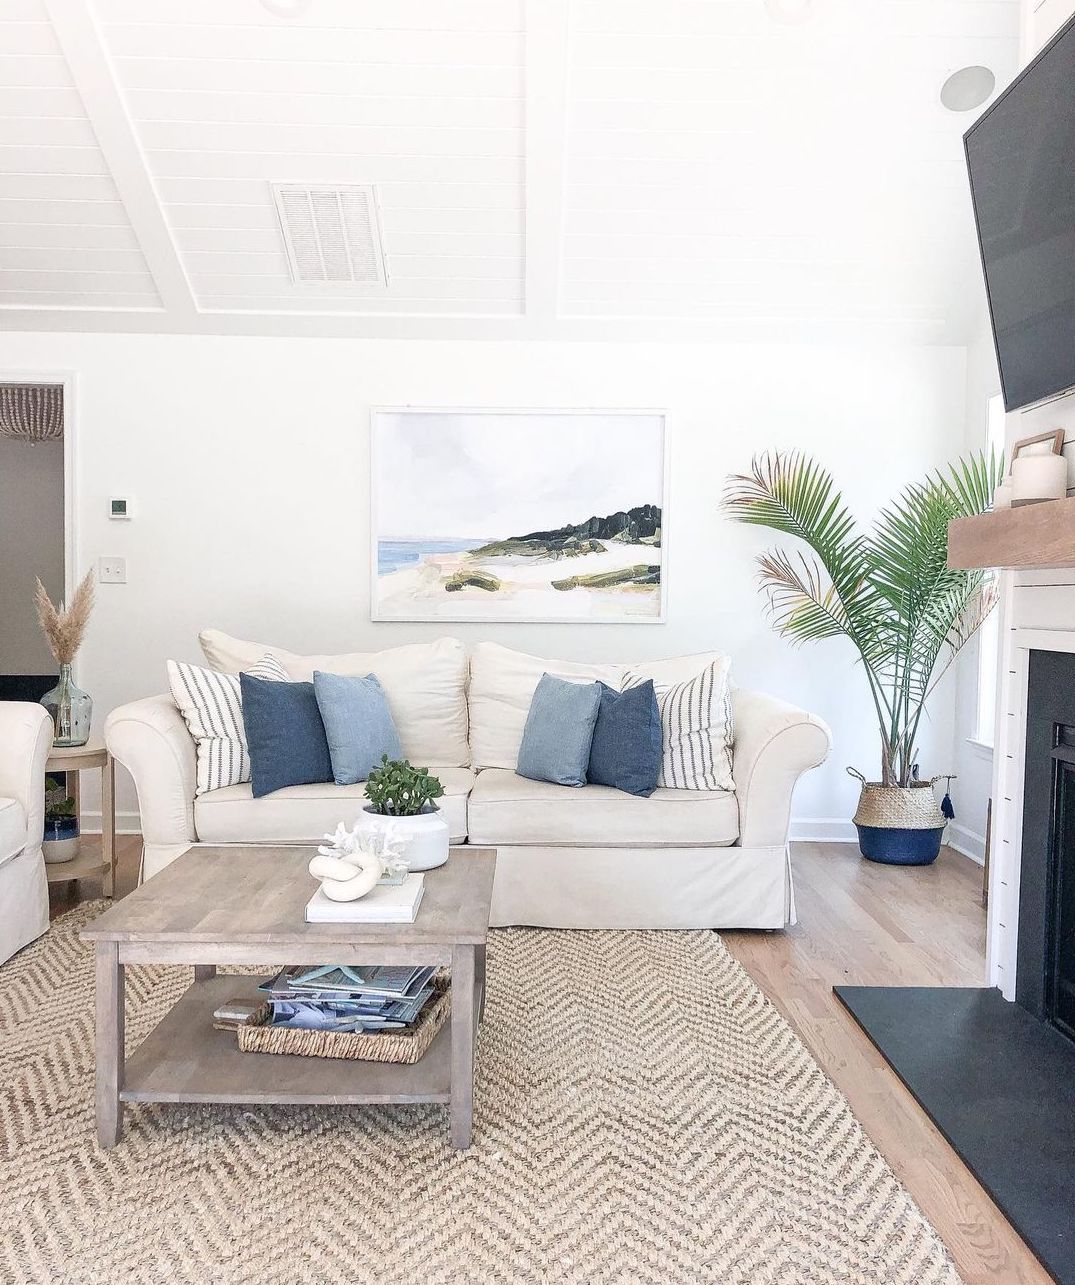 Minimalism and Coastal Farmhouse Decor: How to Avoid a Cluttered Look